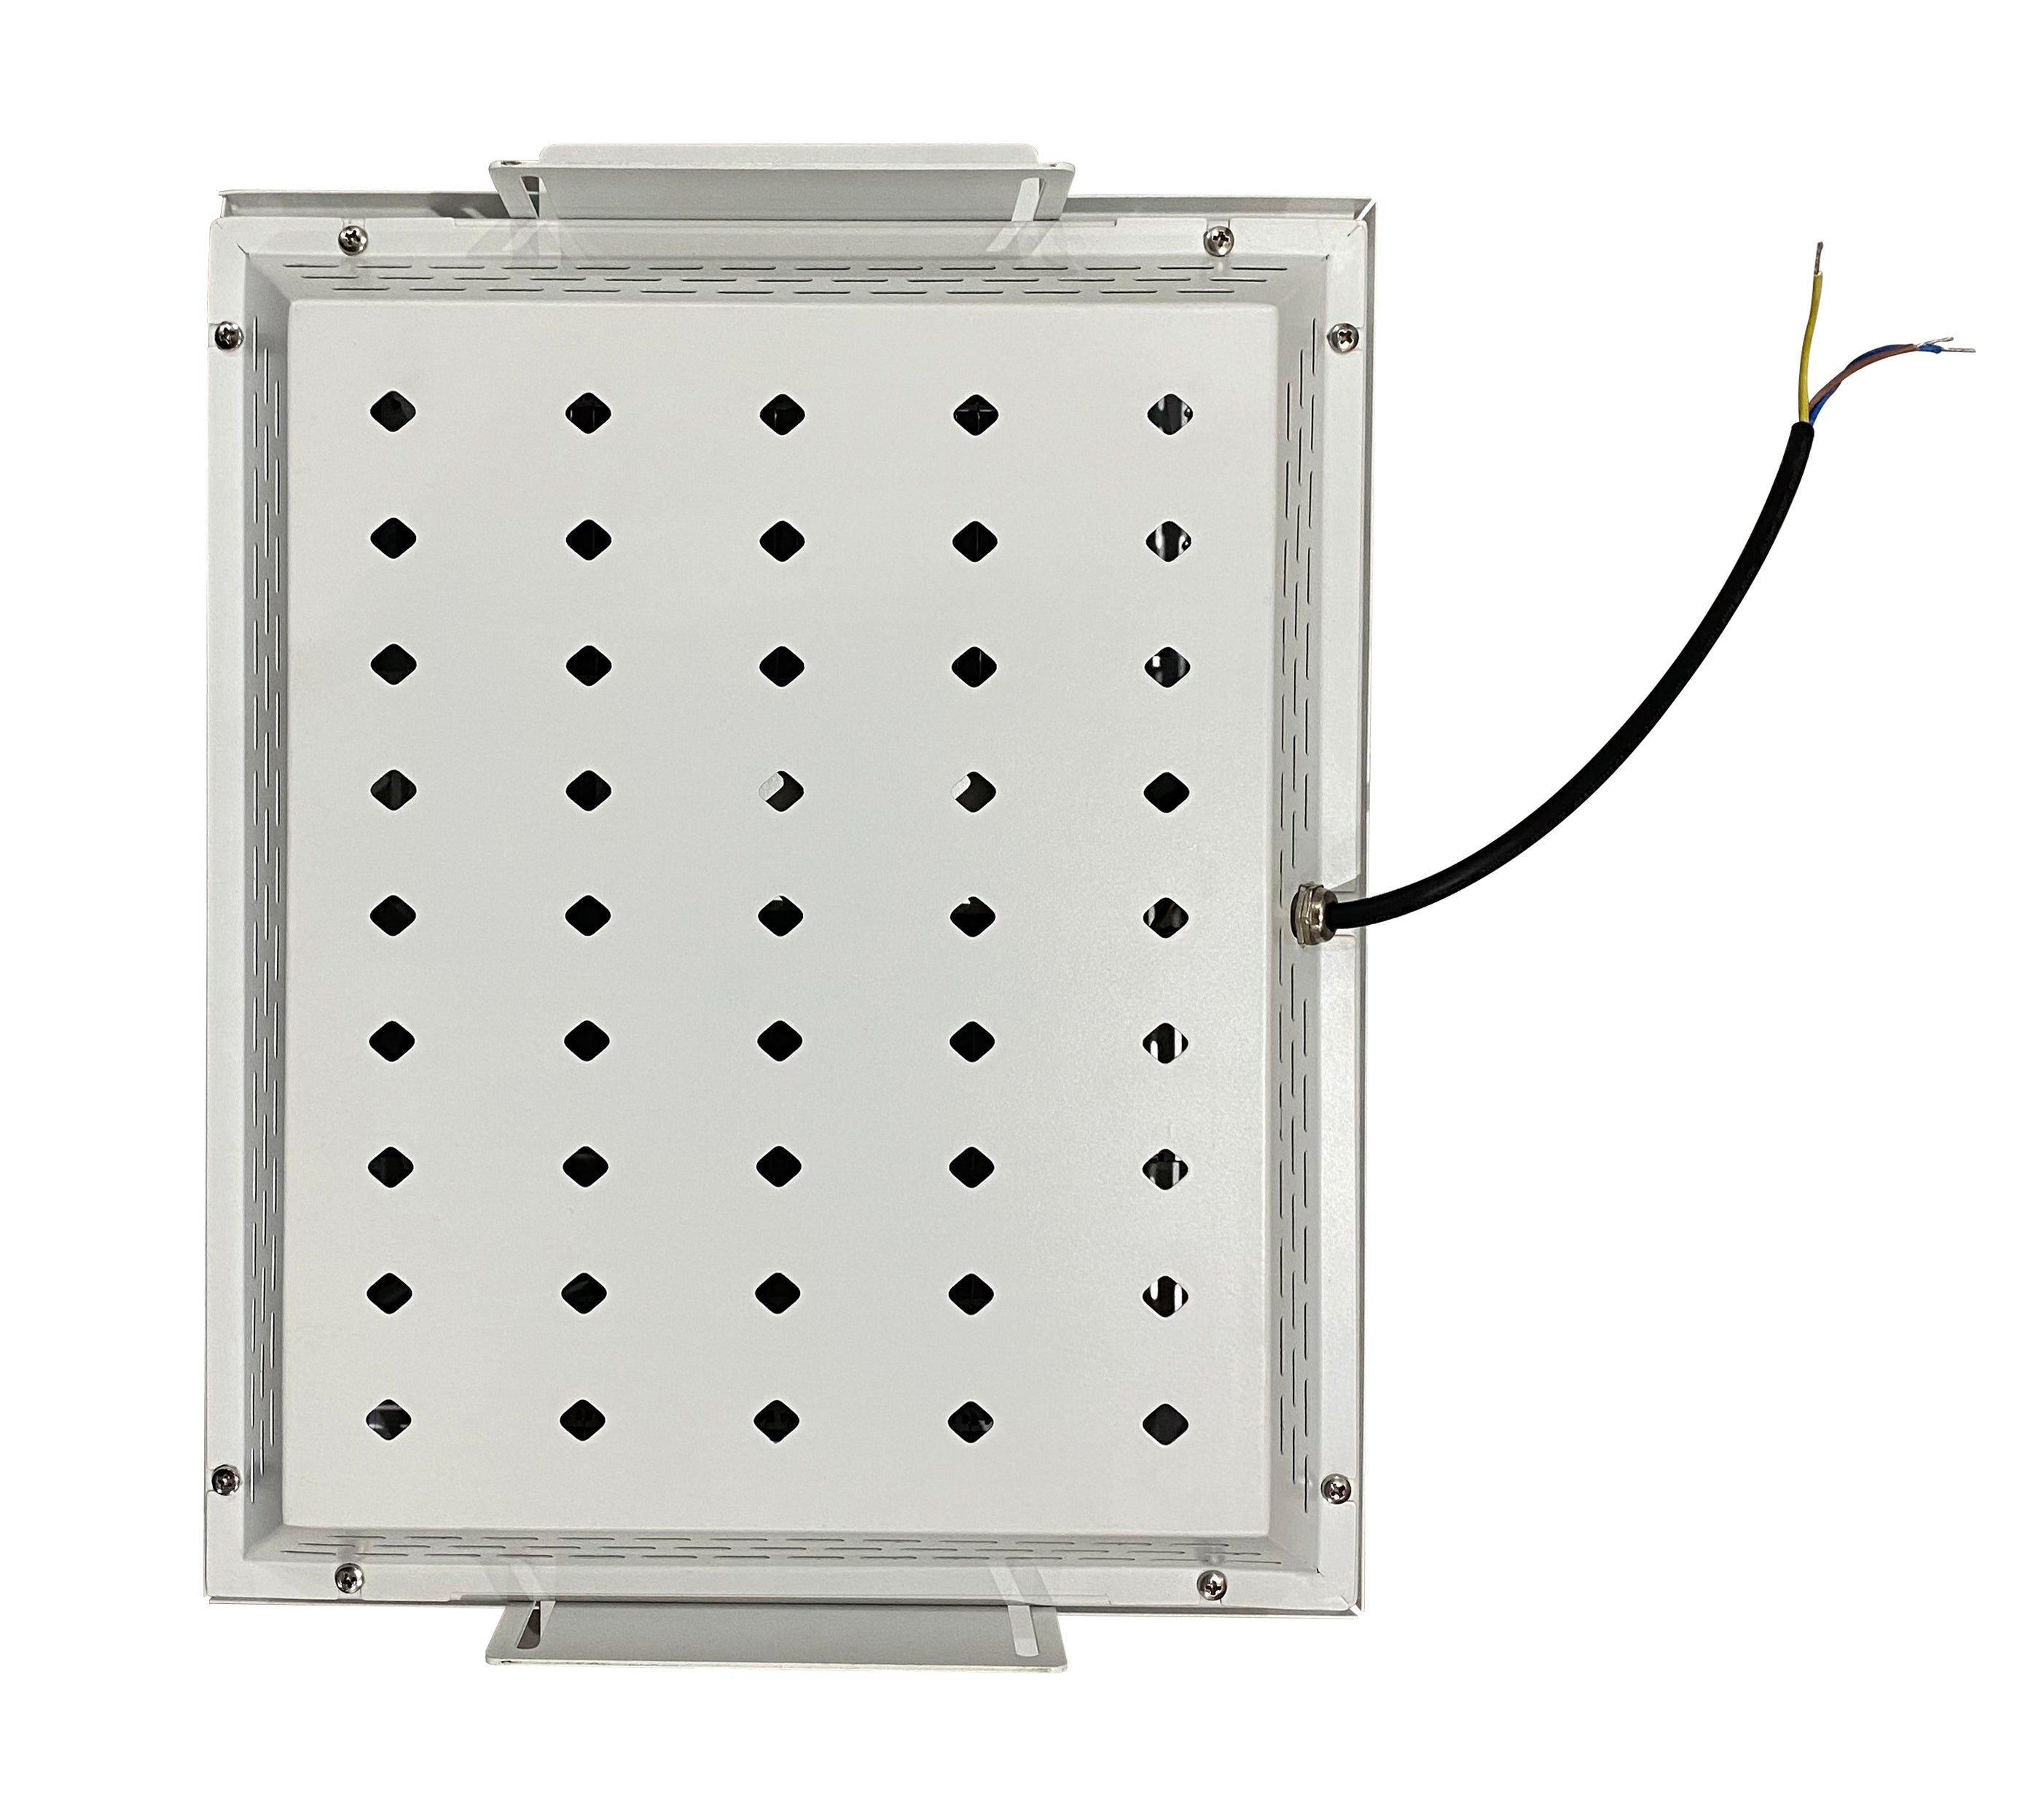 LED Canopy Light Fixture for Fuel Stations, Can be used Recessed or Surface, 6000K, No Flickering, No UV Radiation, Great Efficiency, Industrial Usage, Warehouse & Supermarkets